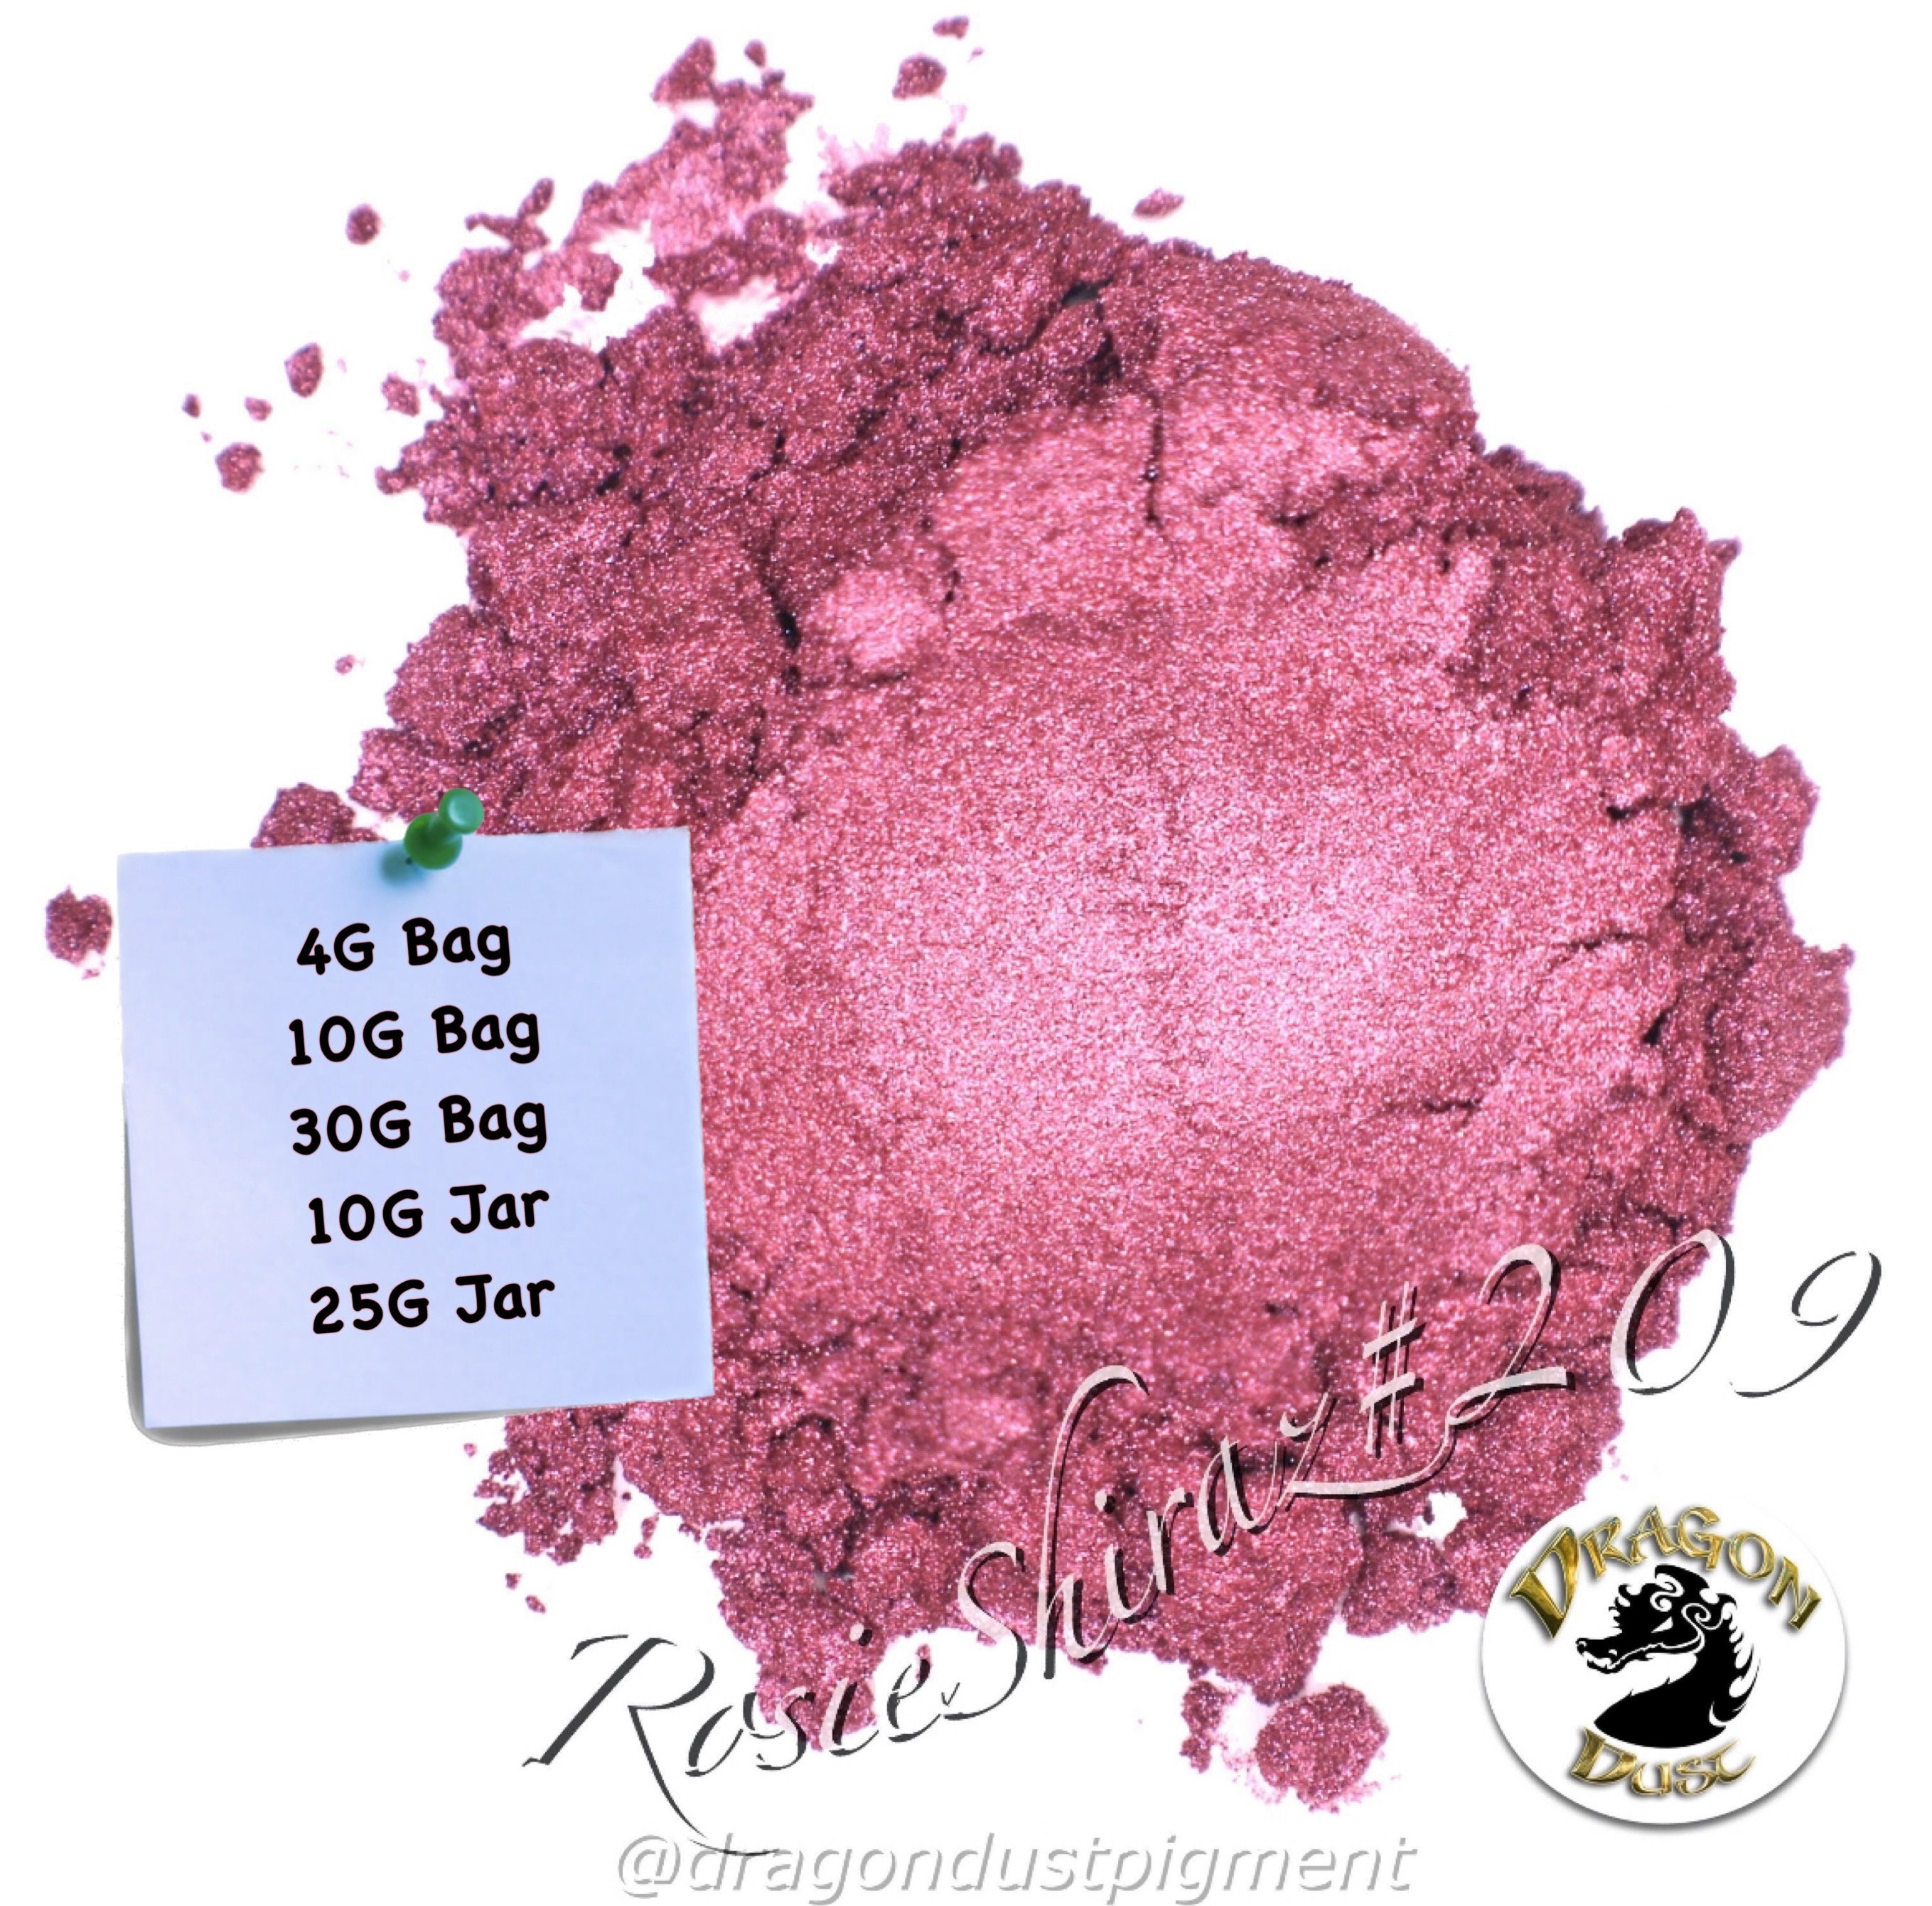 Red Pink Mica Powder Pigments for Nail Polish, Epoxy Resin, Bath Bombs,  Soaps, Makeup, Lip Gloss, Candles ROSIE SHIRAZ Pink Wine 209 4g 